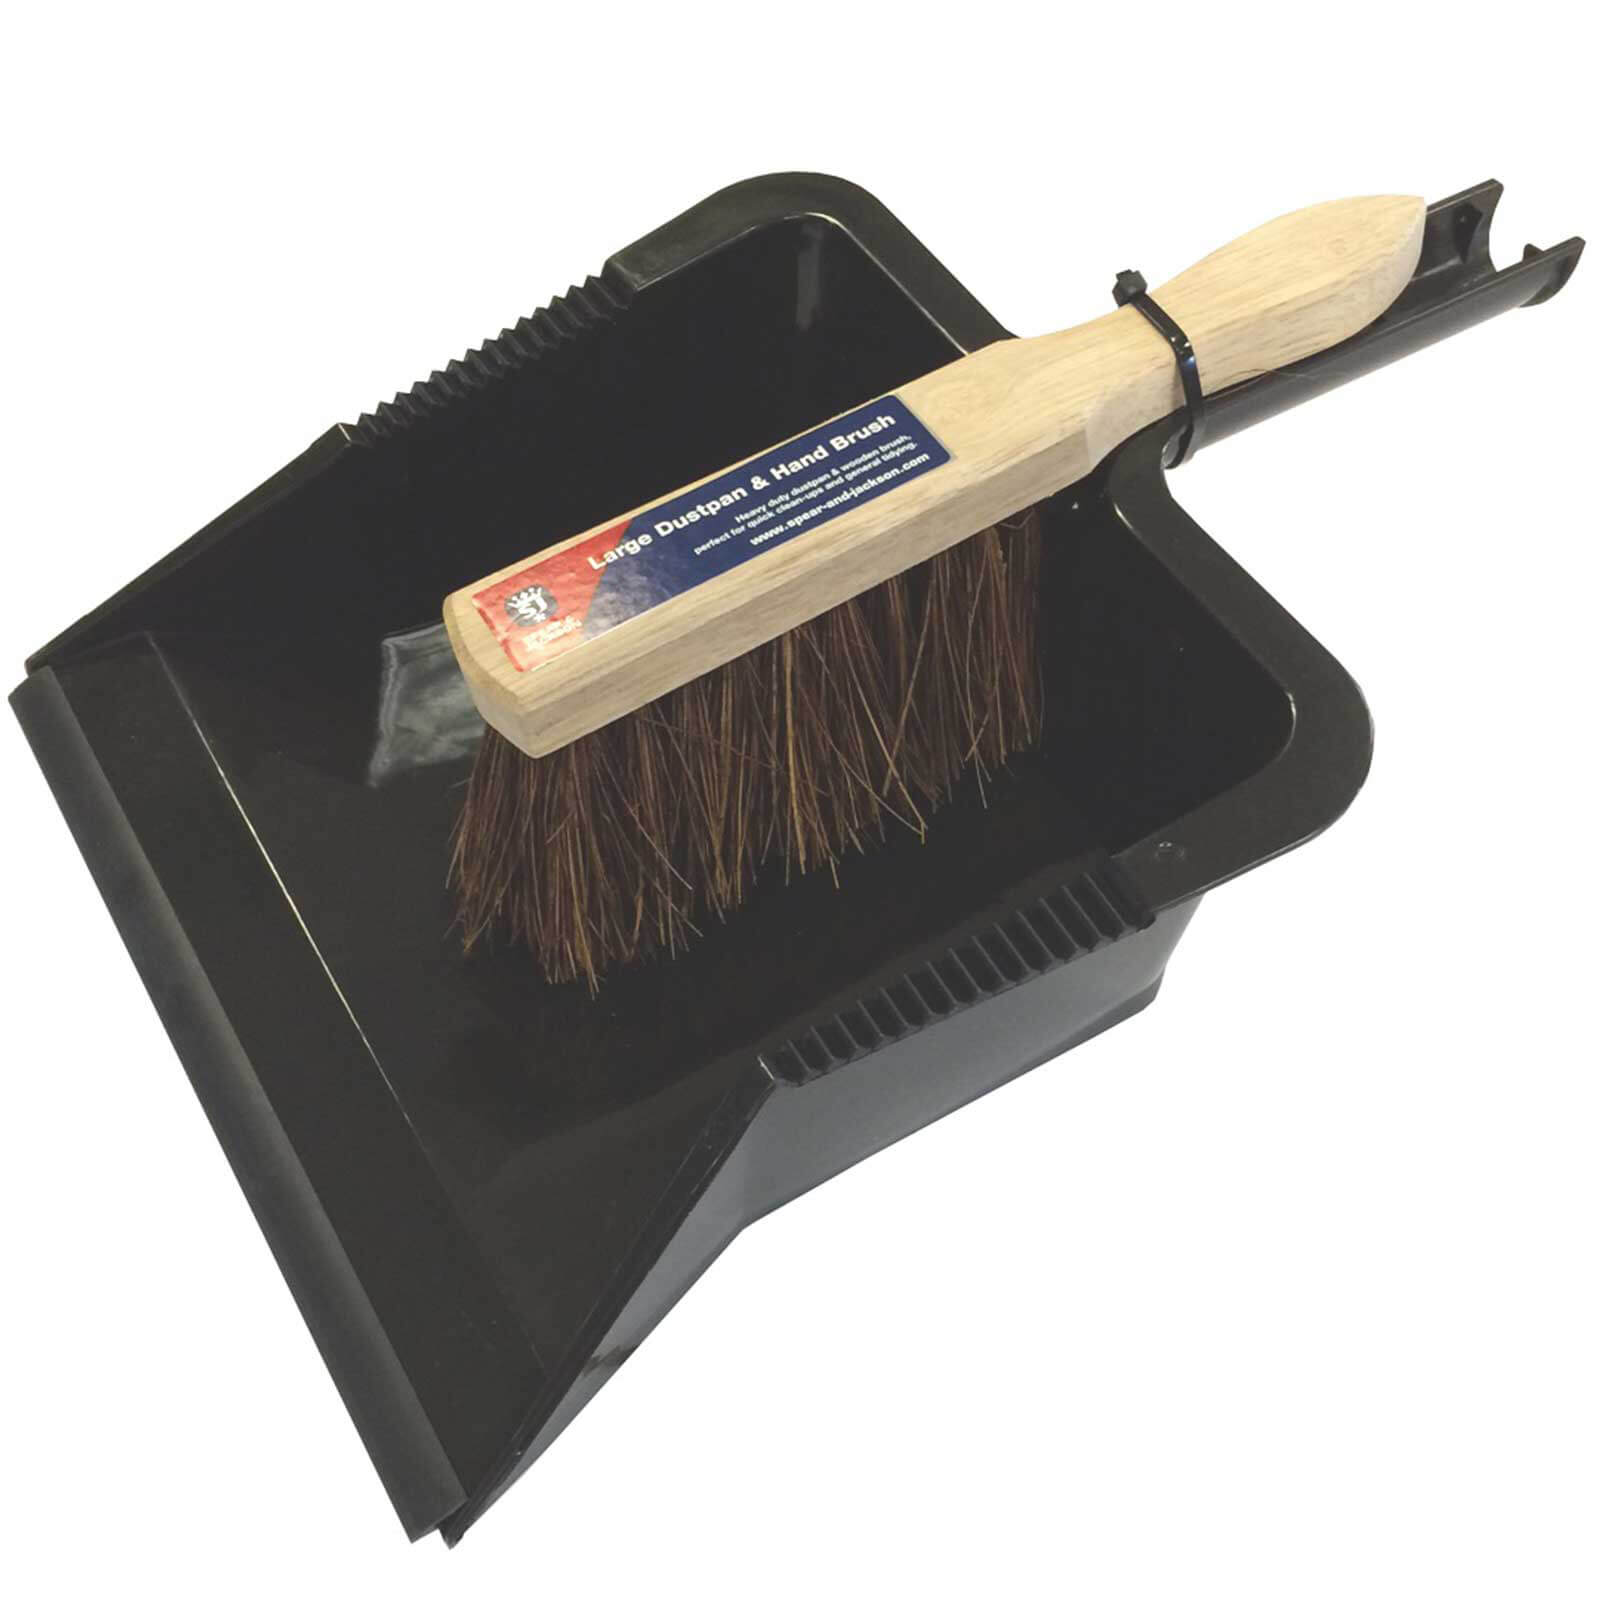 Spear and Jackson Garden Dustpan and Brush